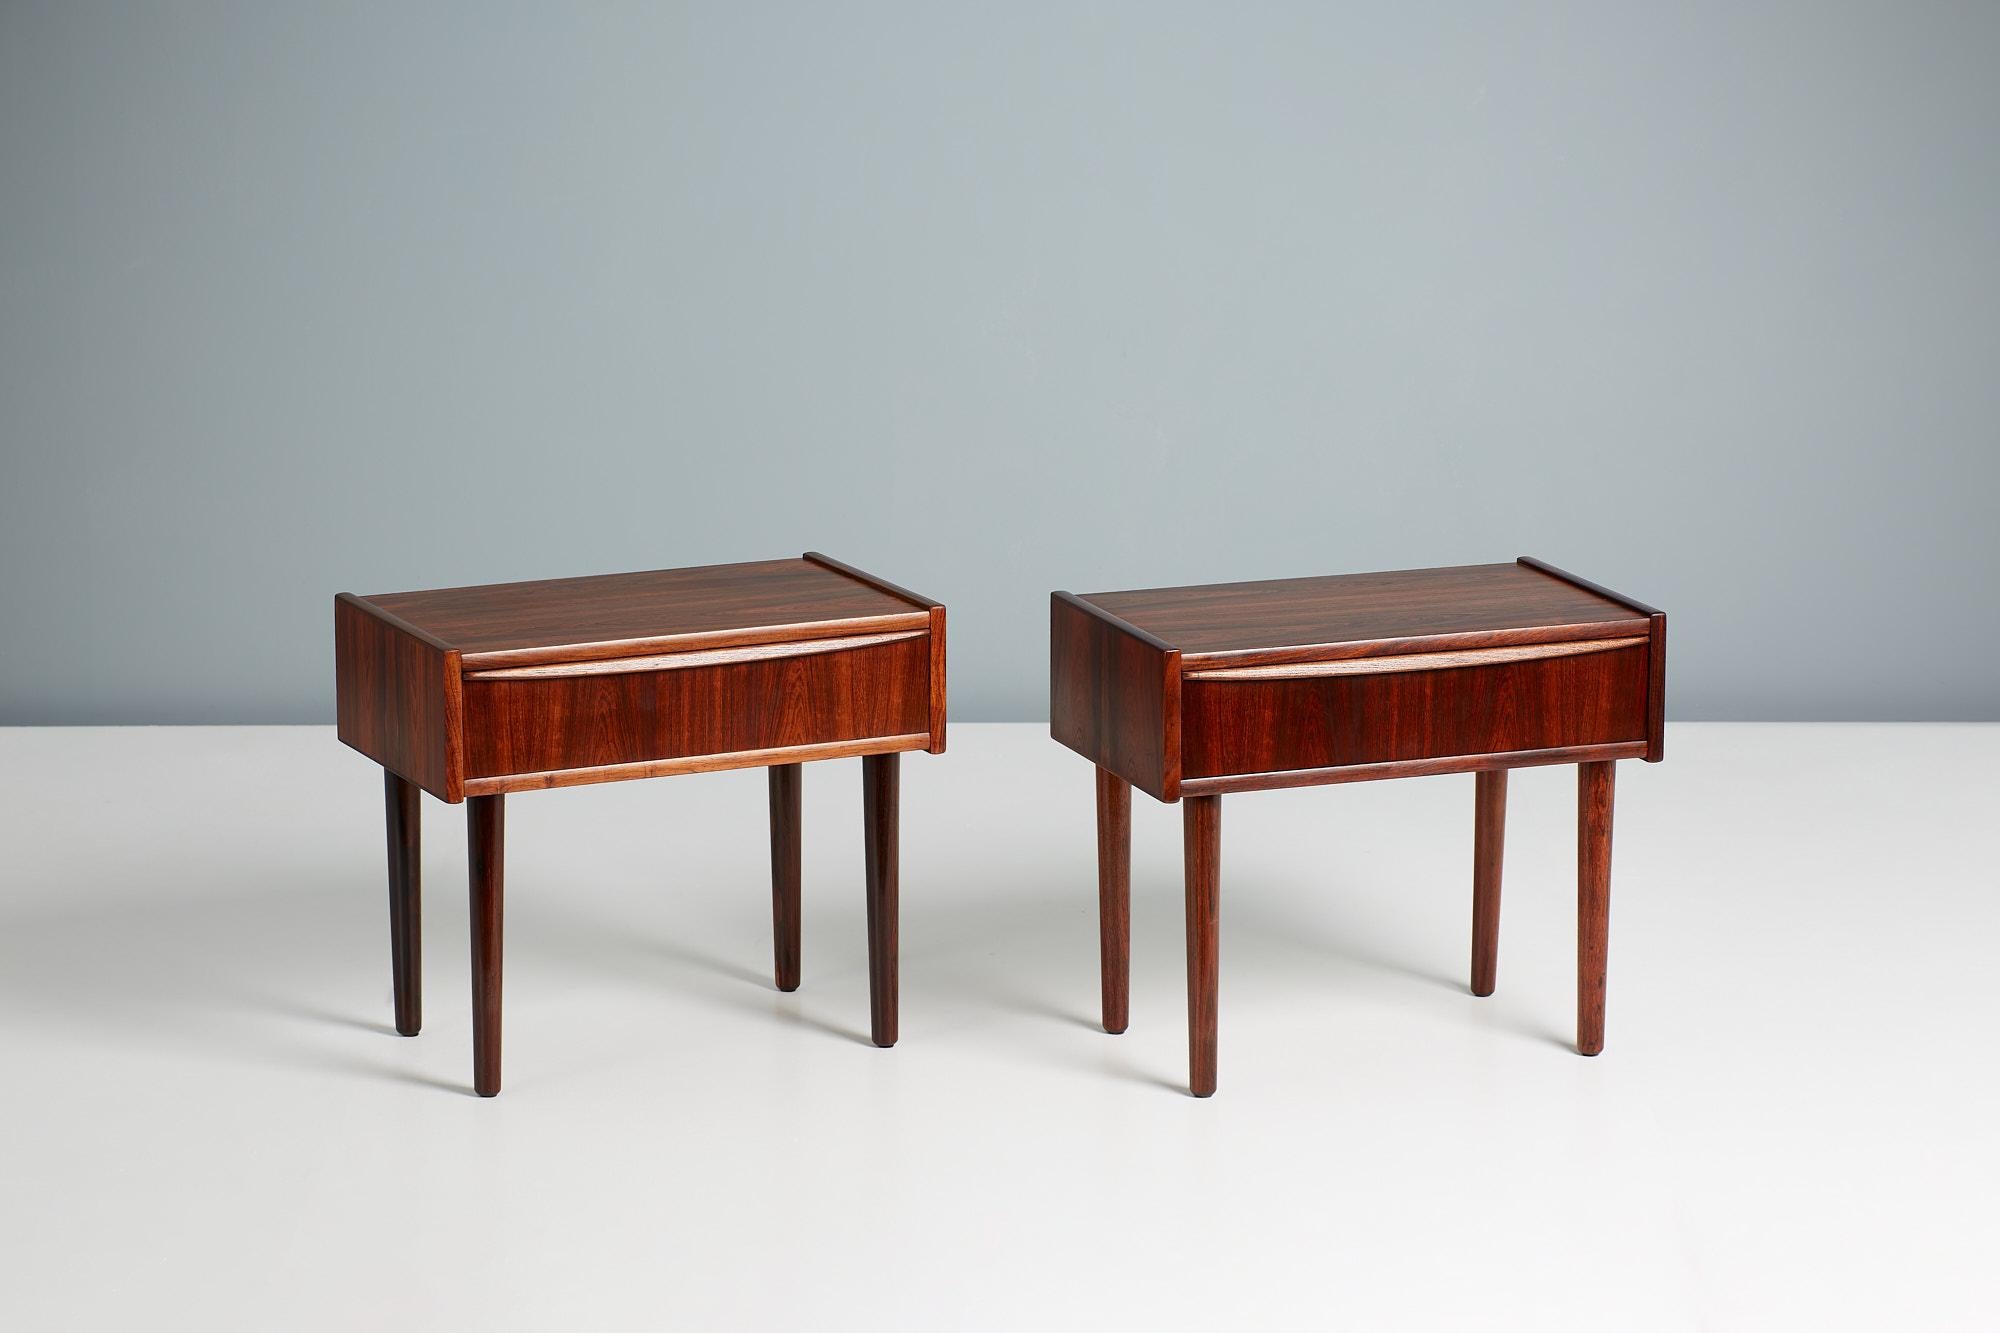 Pair of Danish cabinetmaker bedside nightstands produced circa 1960. Made from solid and veneered rosewood with a single drawer per nightstand.